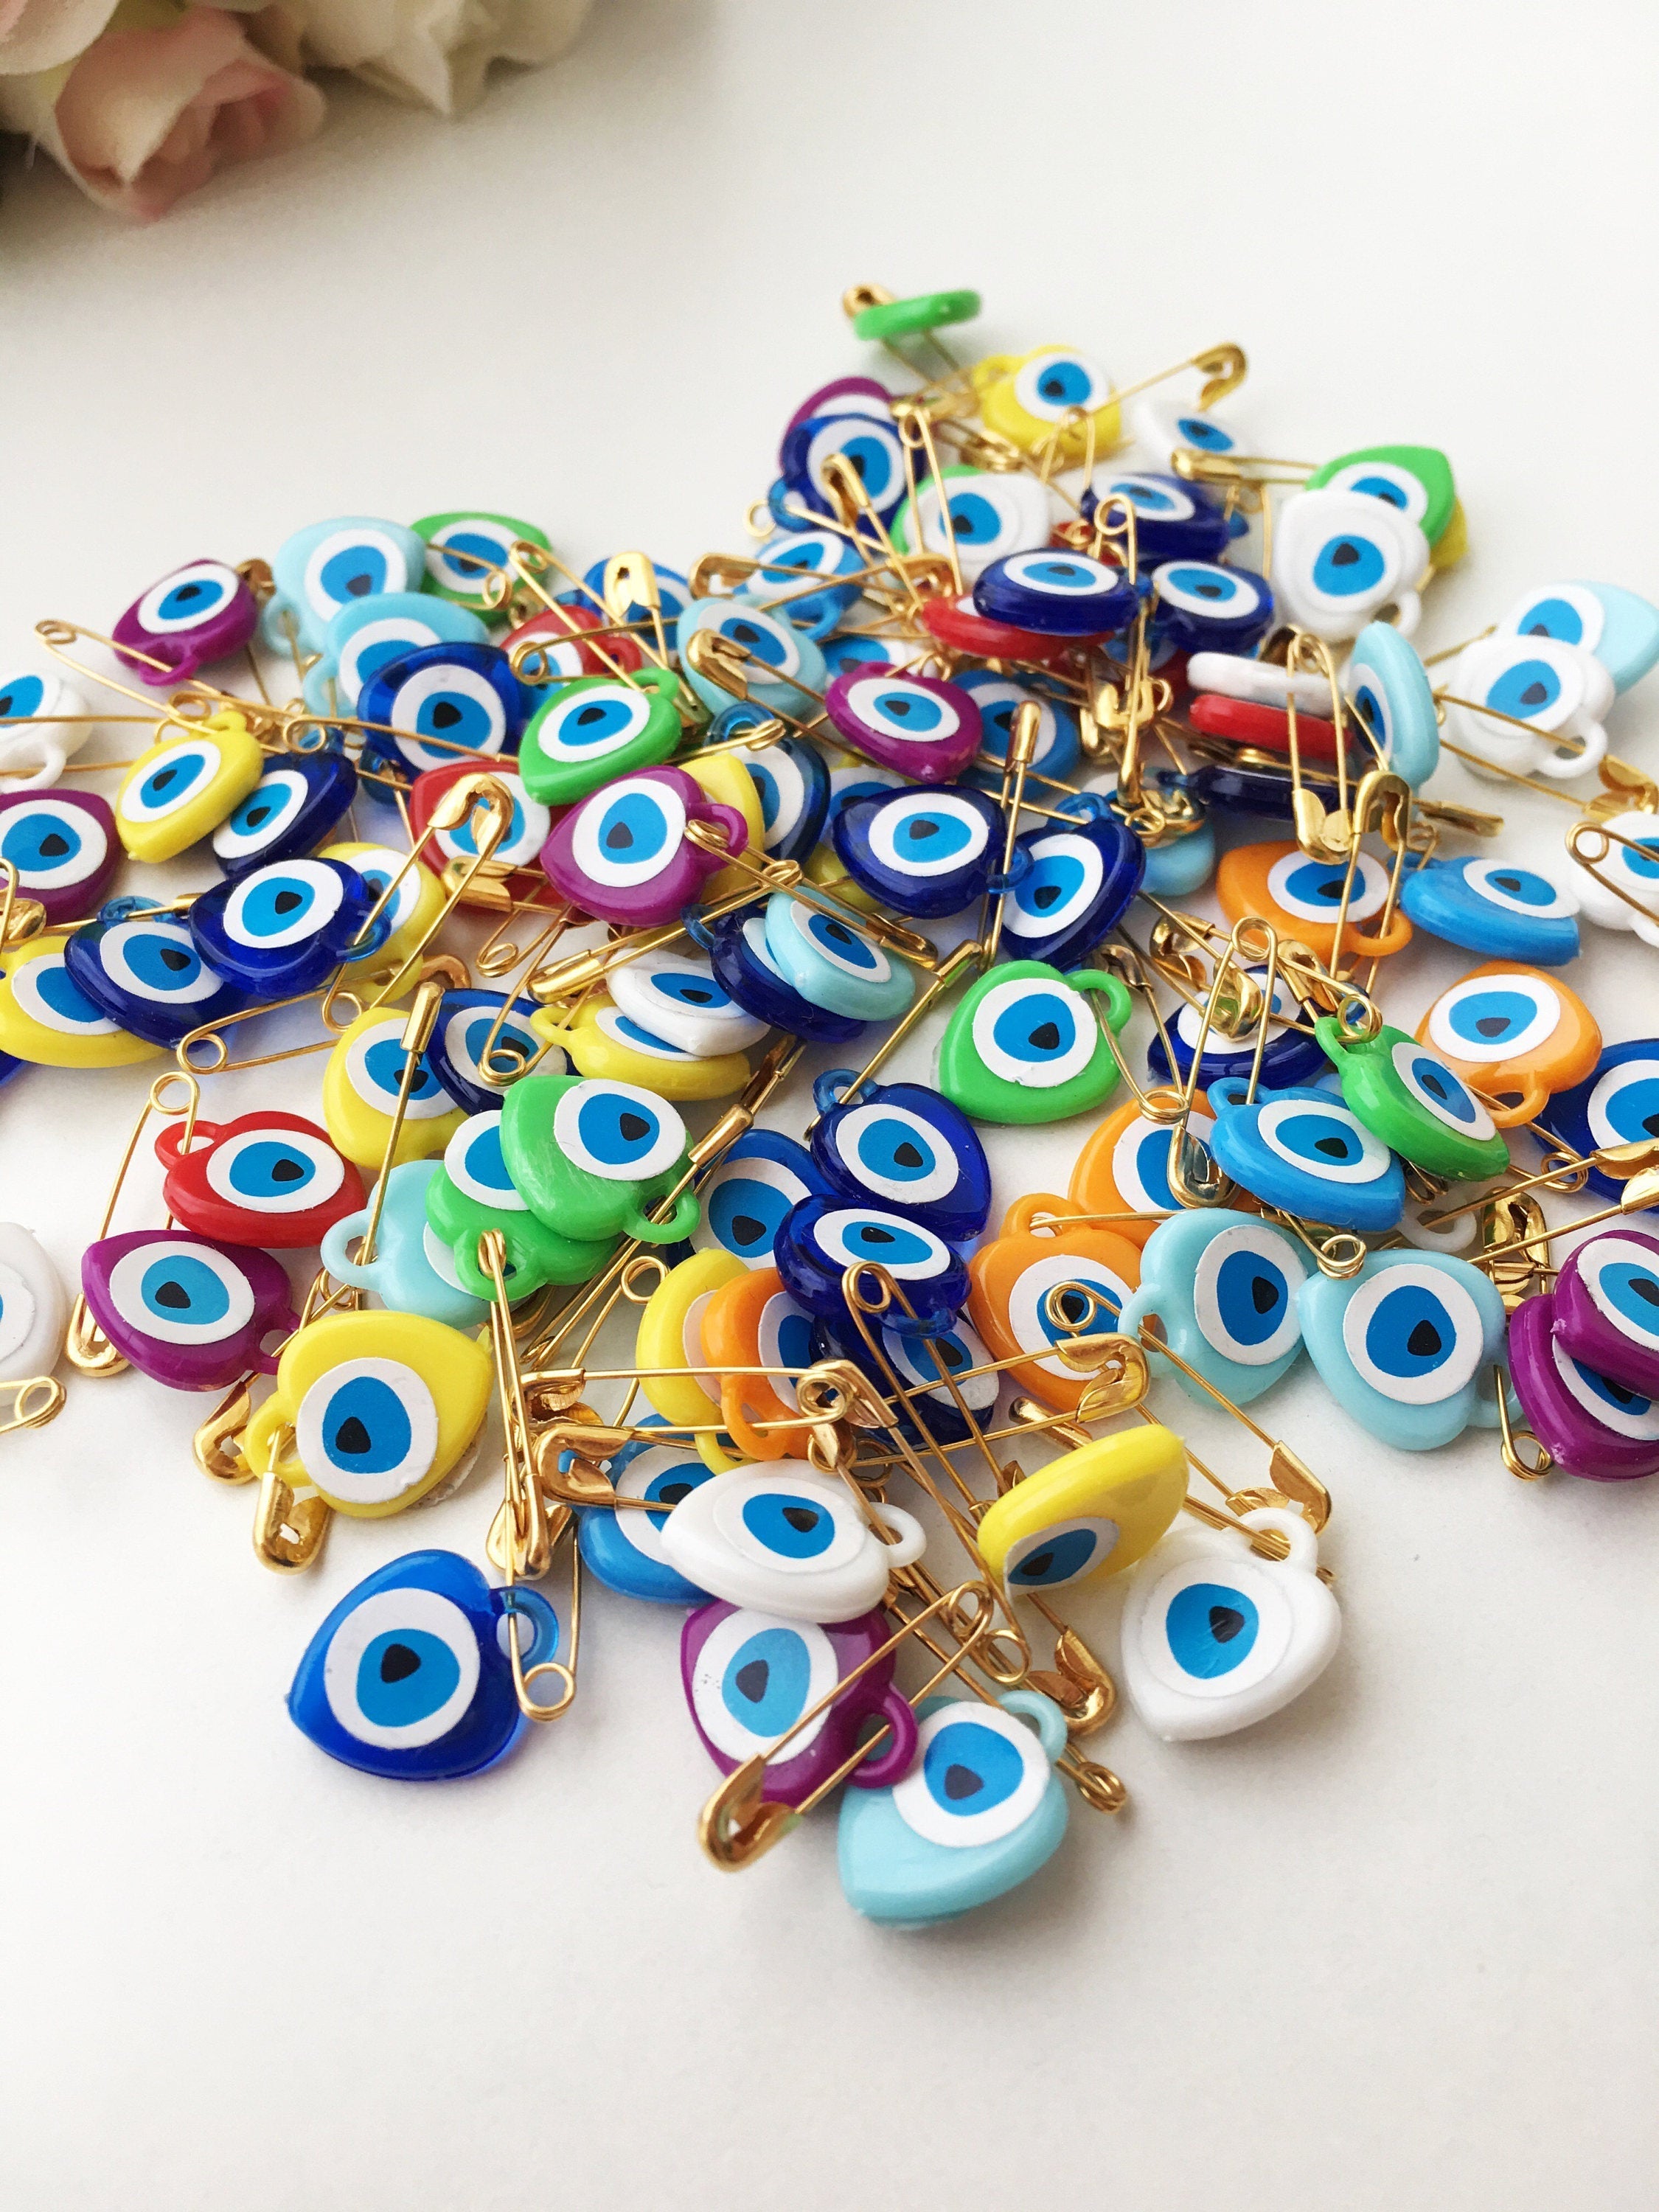 100 Mixed Resin Evil Eye Safety Pins for Unique Wedding Favors and Gifts - Nazar Boncuk Beads Included Bijou Her